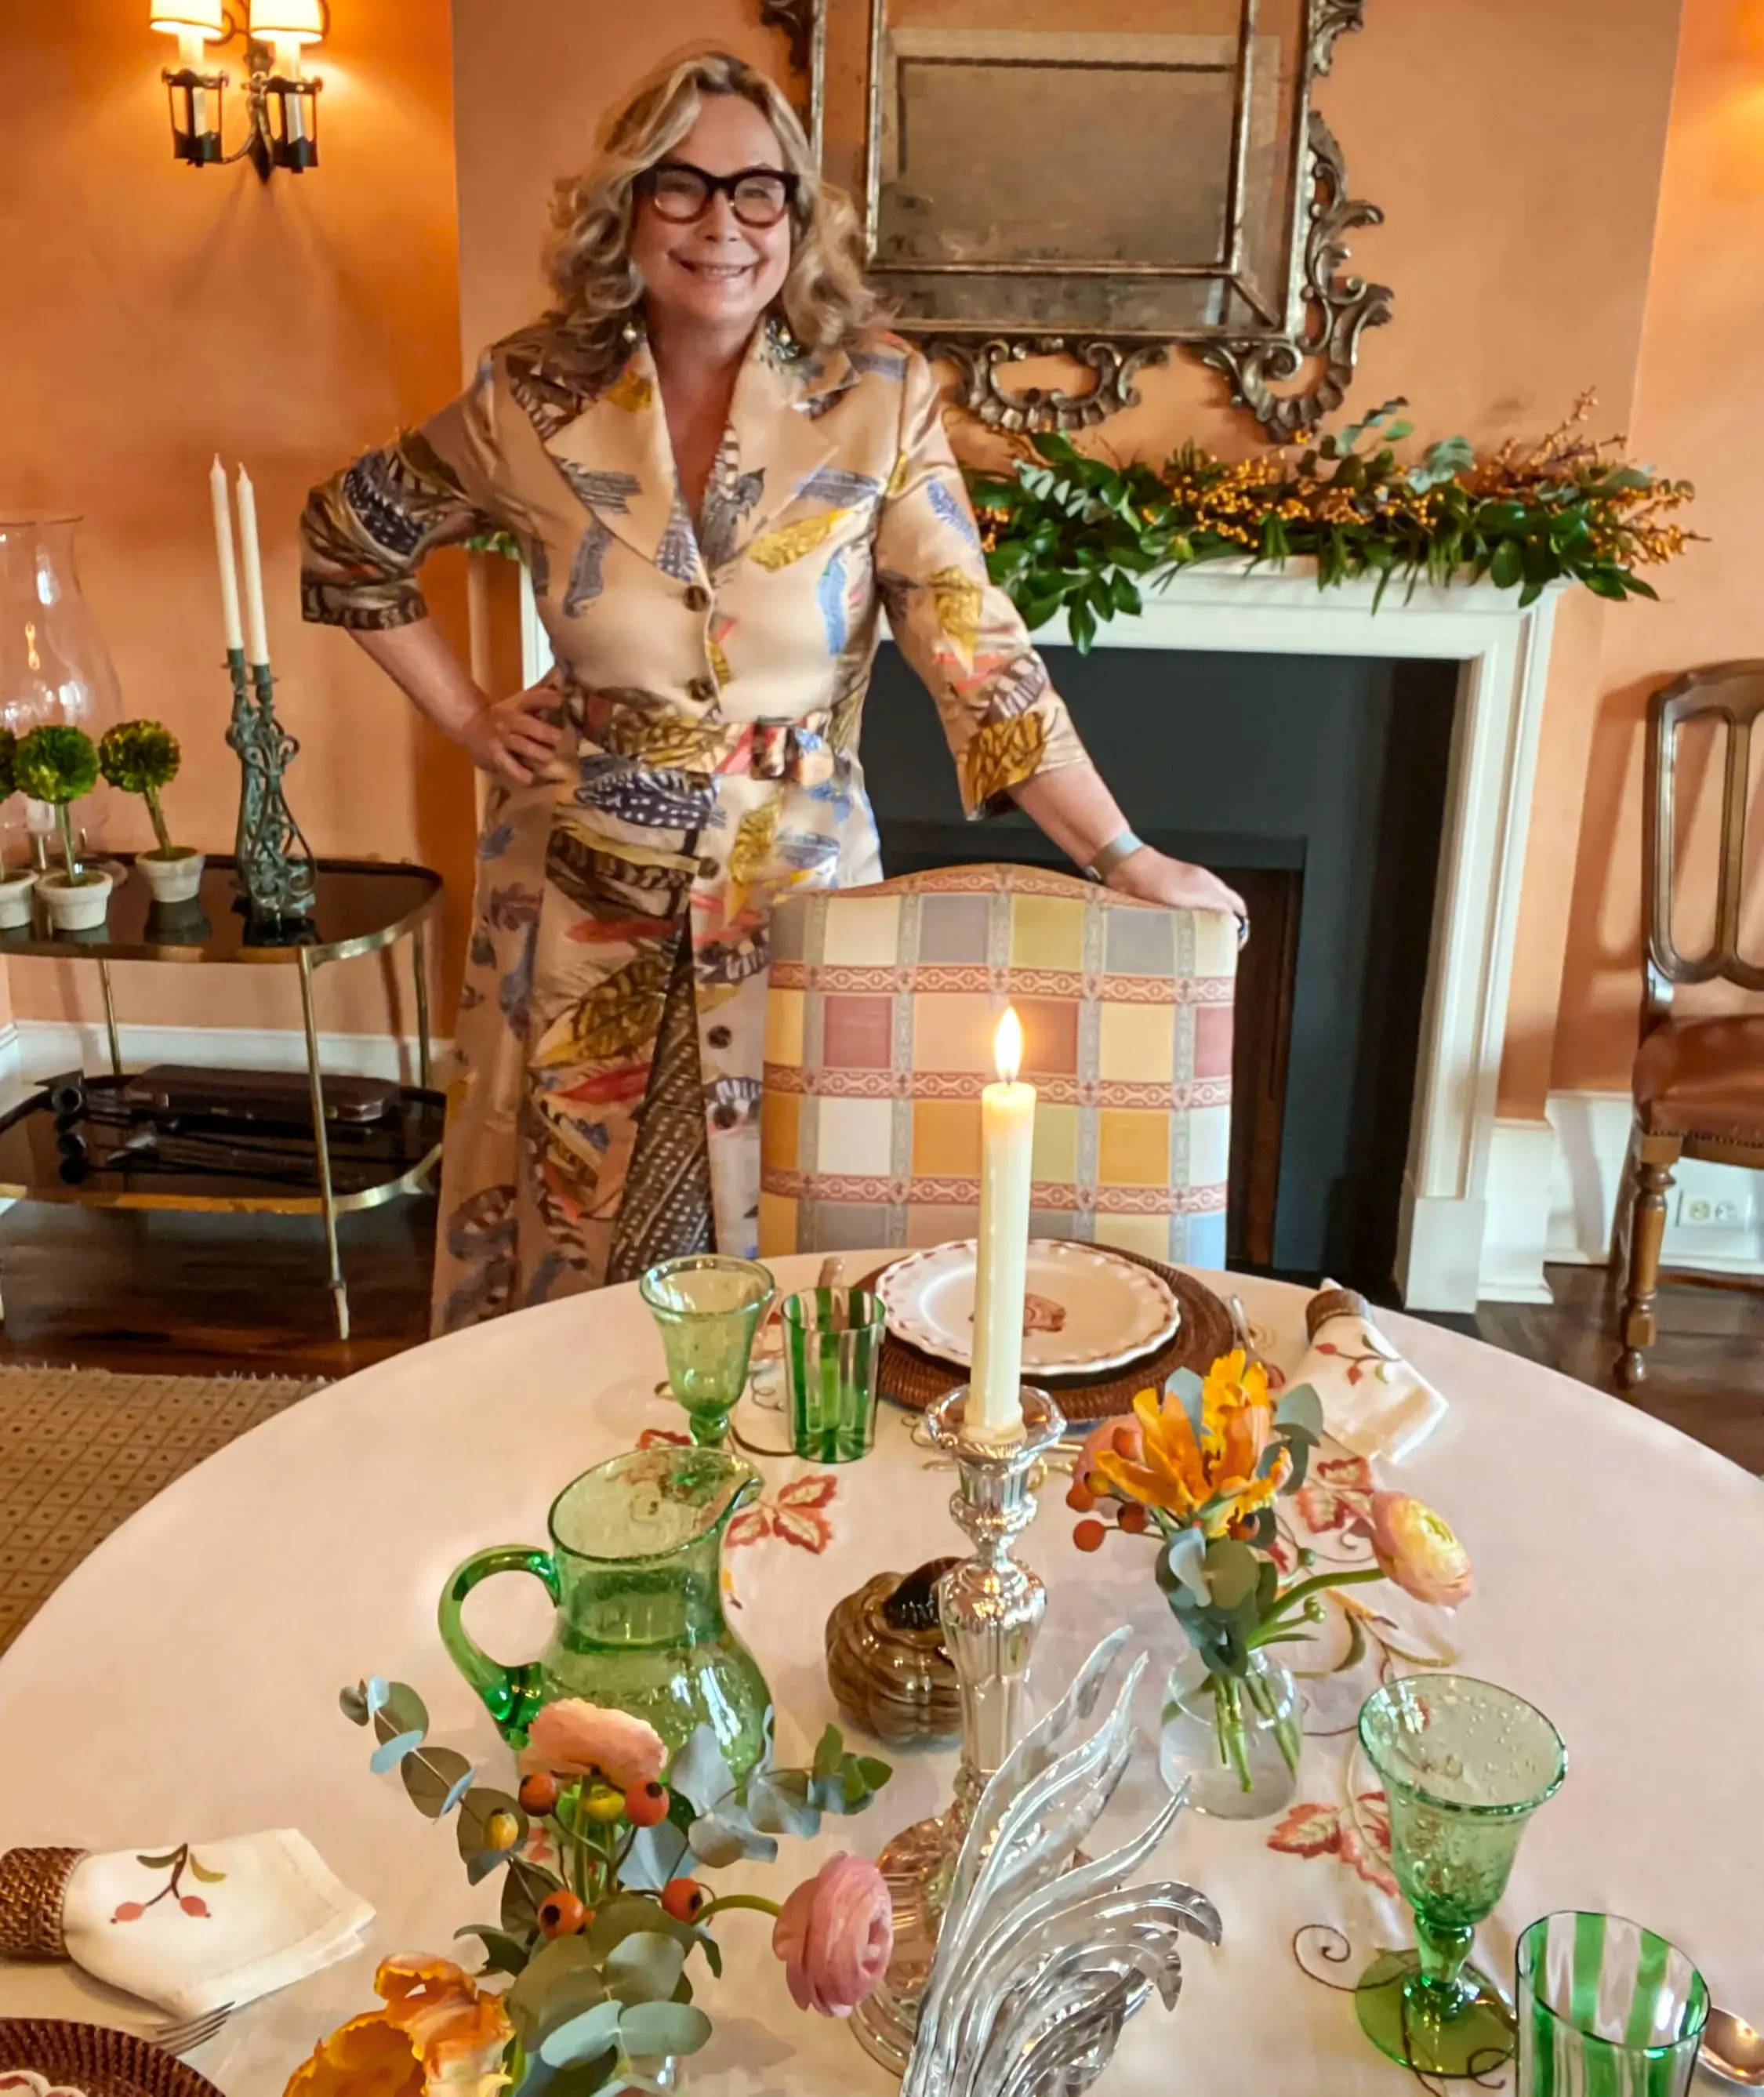 Ala Isham at her Thanksgiving table wearing feather pritned silk jacket by Ala von Auersperg